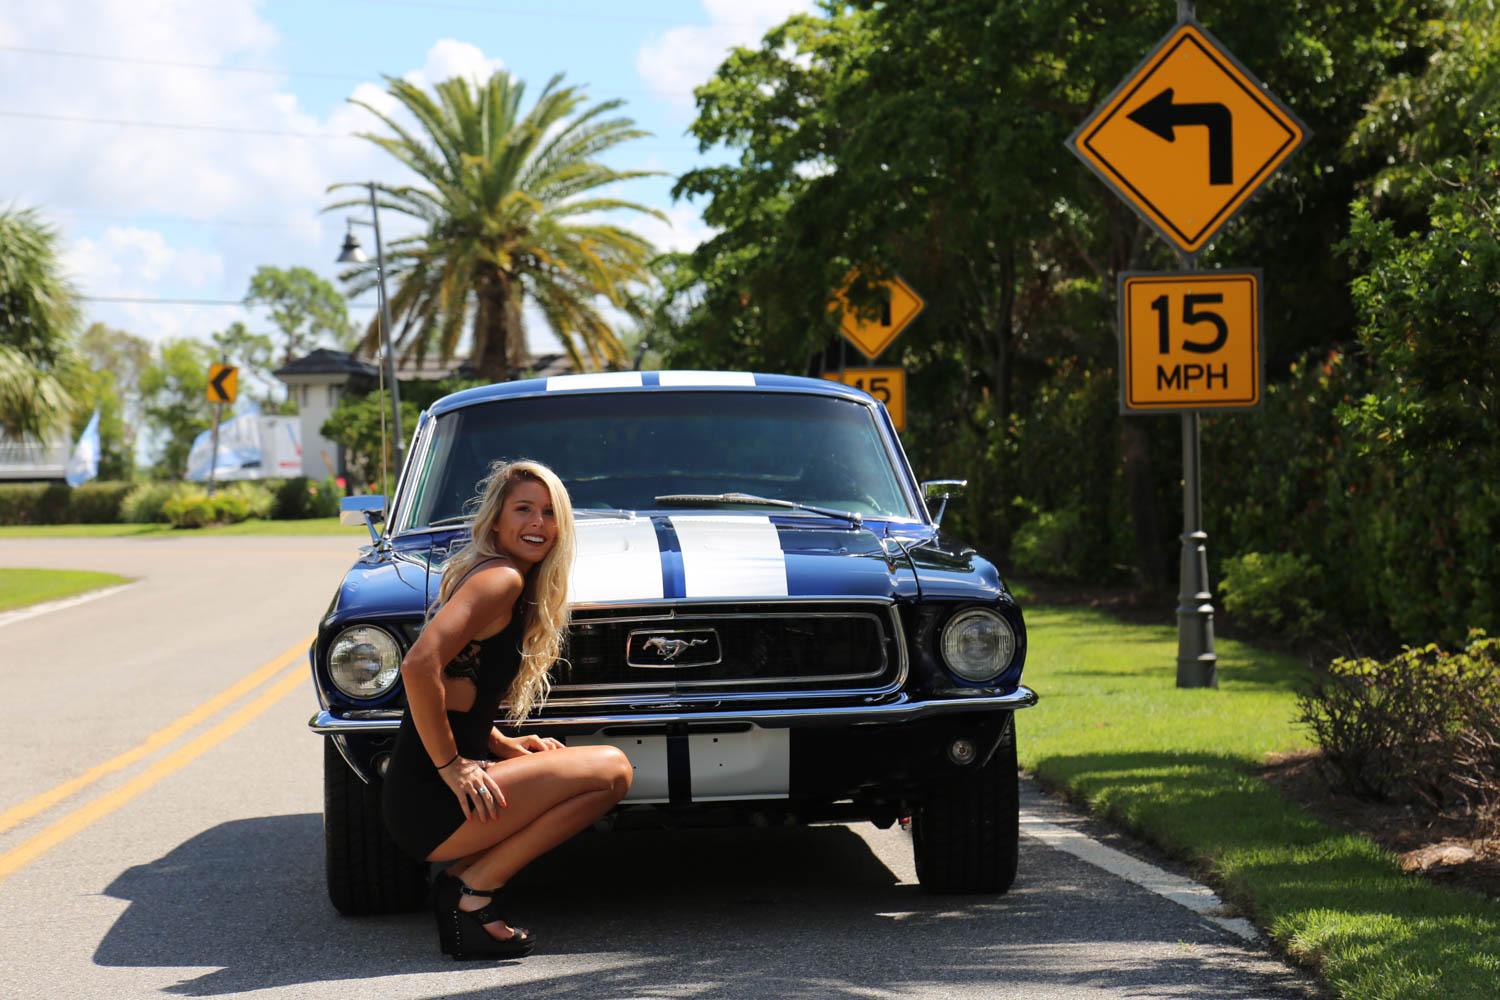 Used 1968 FASTBACK Mustang Mustang for sale Sold at Muscle Cars for Sale Inc. in Fort Myers FL 33912 4